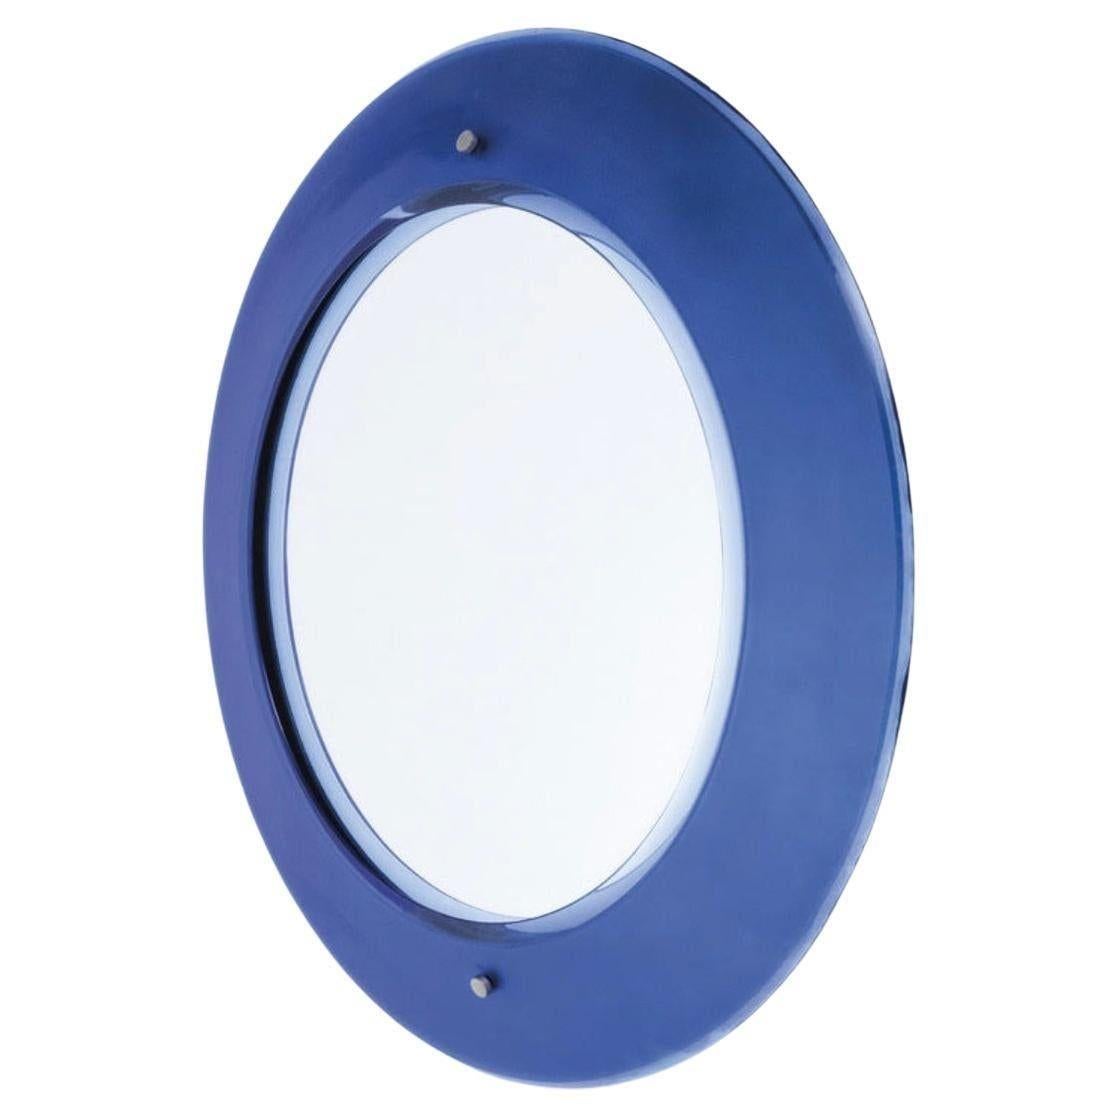 Vintage round mirror with a bevel deep cobalt blue glass frame and mirrored center. It includes a wooden structure and has nickel-plated brass details. Produced by Fontana Arte, designed by Max Ingrand, Italy, c. 1960's.
*Information on provenance